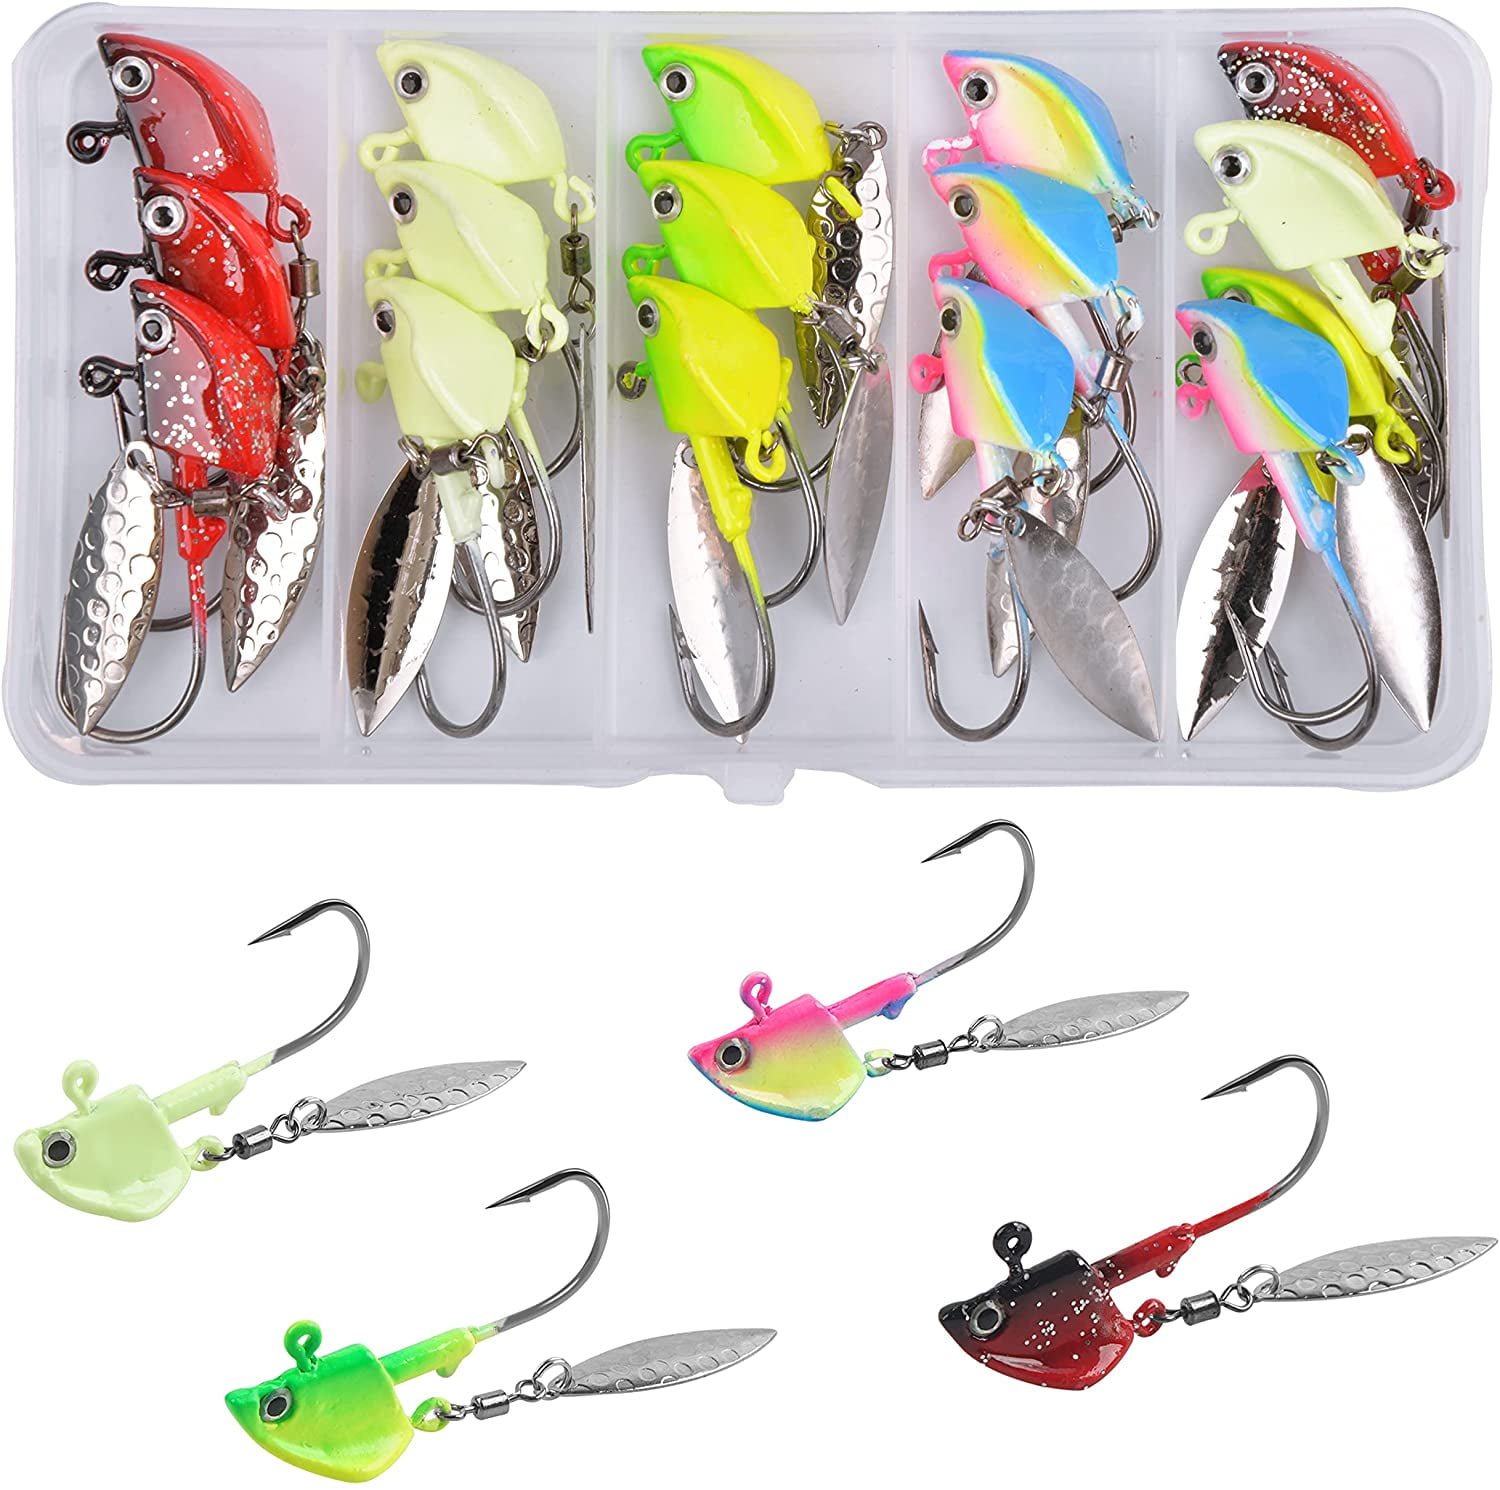 Dovesun Fishing Jig Heads Underspin Jig Heads with Willow Blade Green/Colorful/Red 1/8oz 1/4oz 3/8oz 1/2oz 10pcs